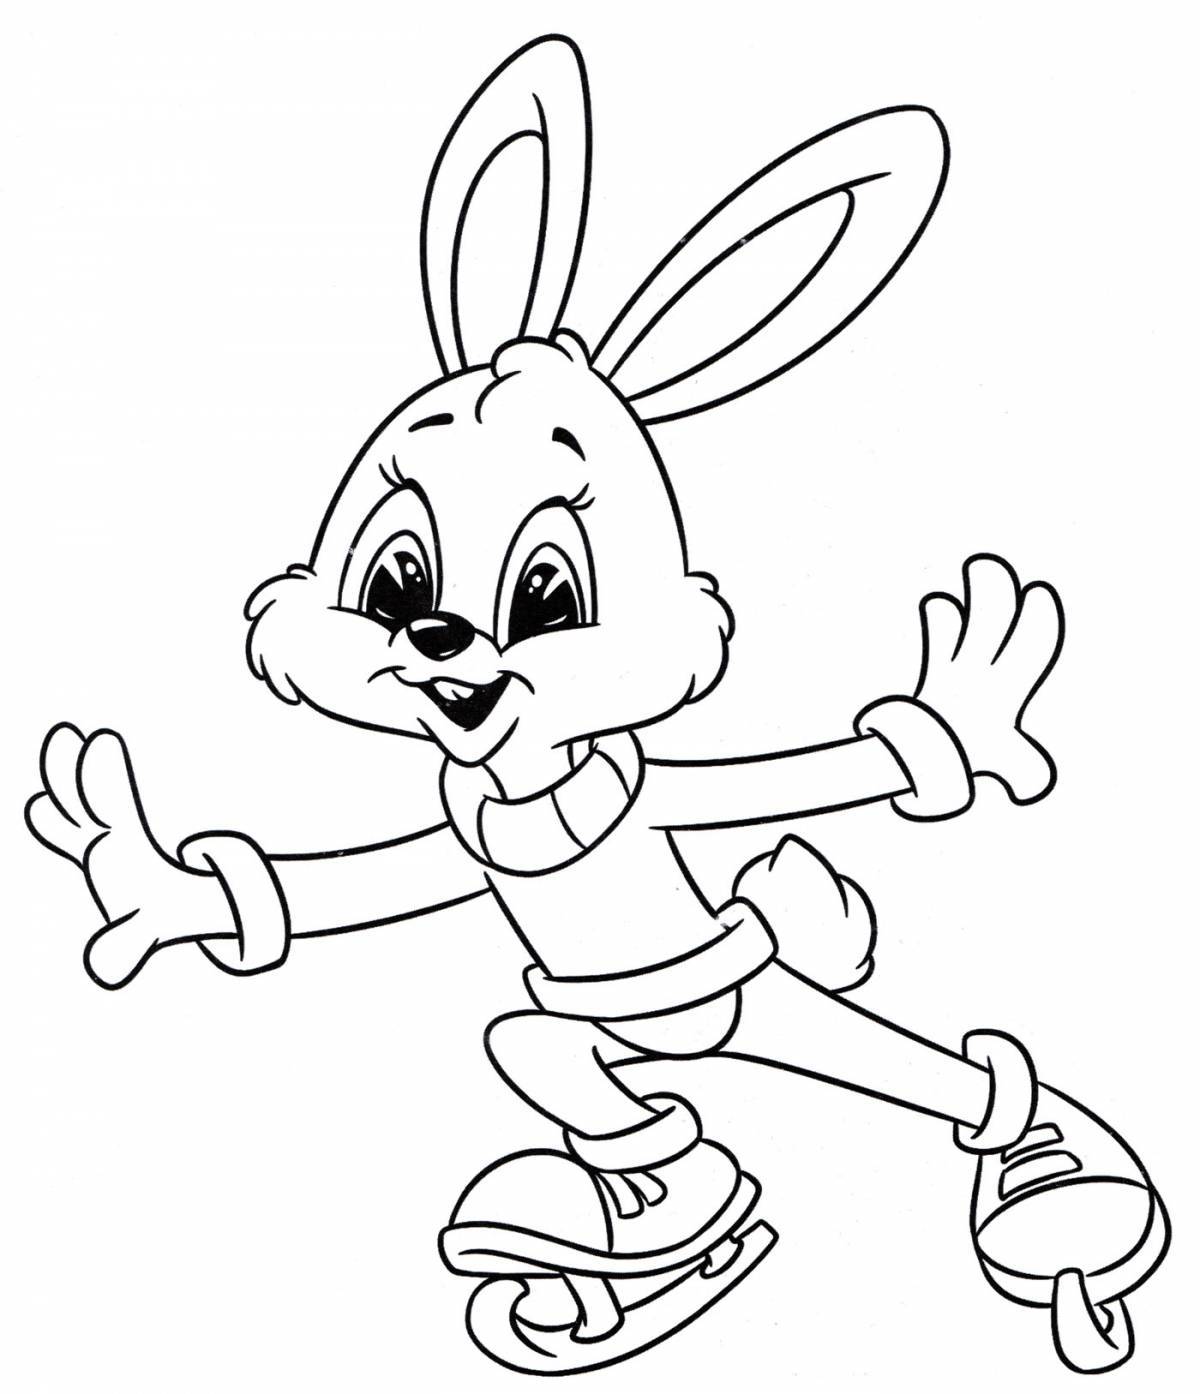 Adorable rabbit coloring game